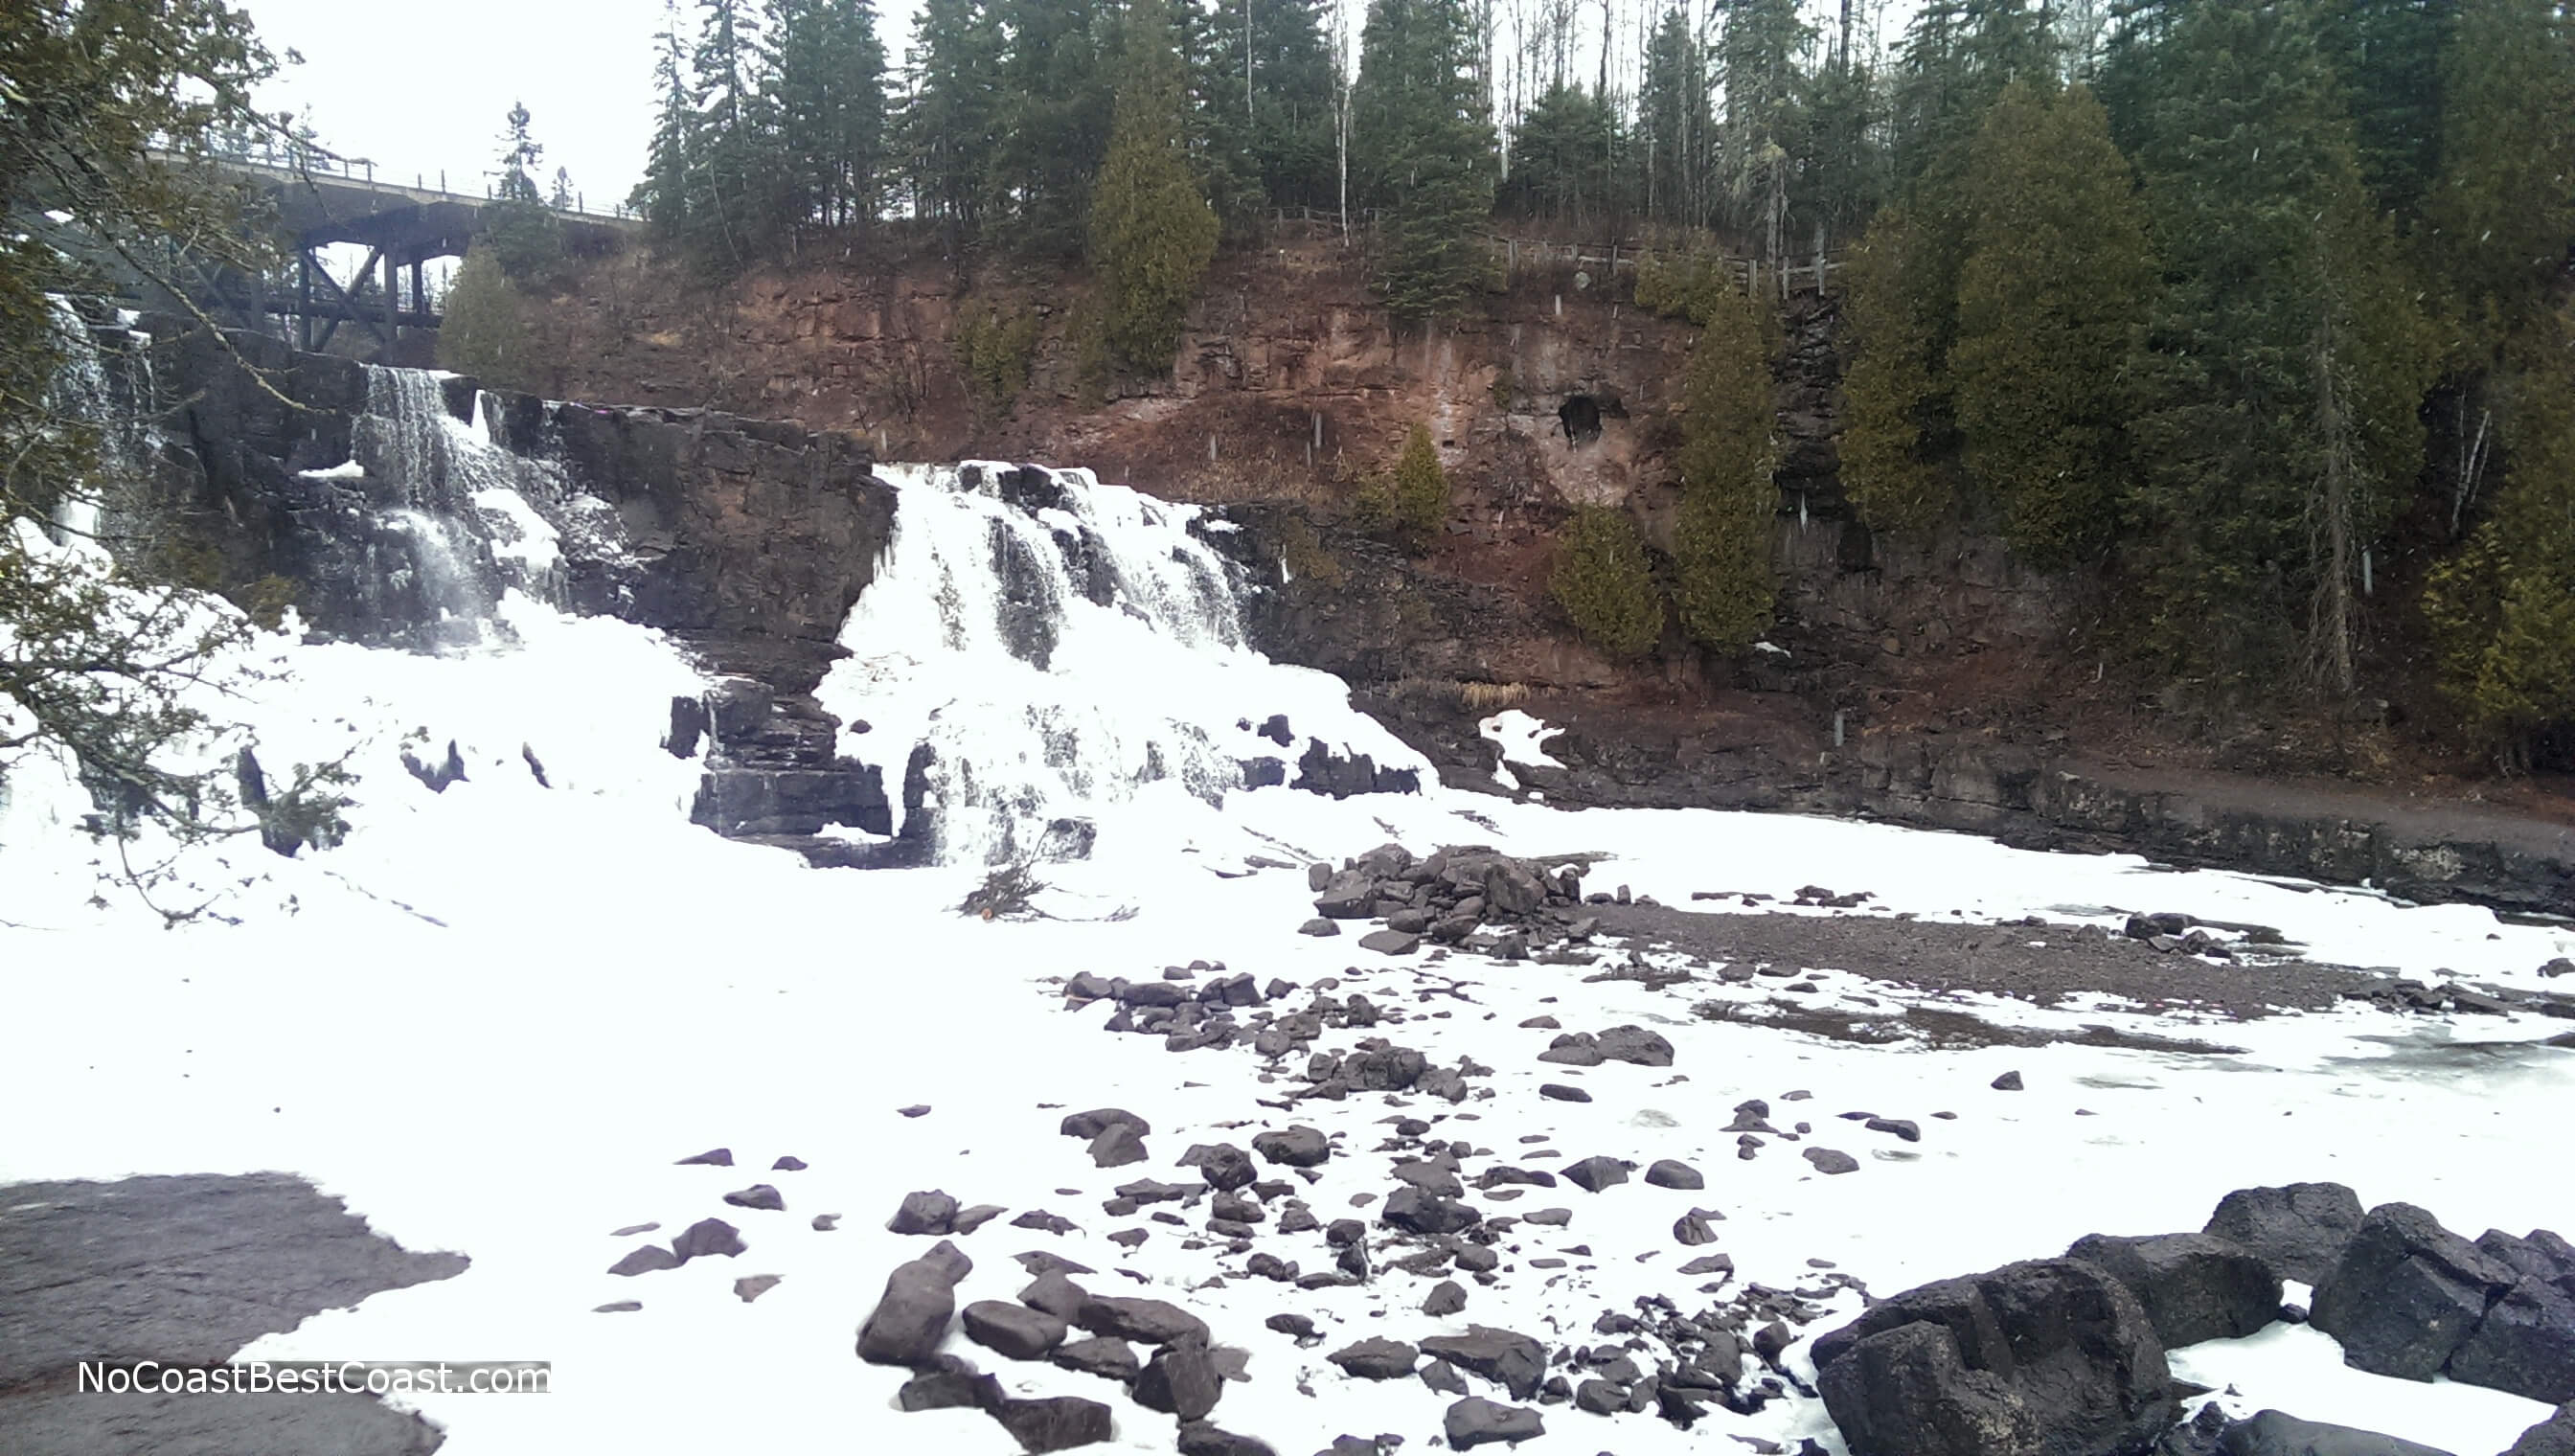 Frozen Middle Falls from the viewing area